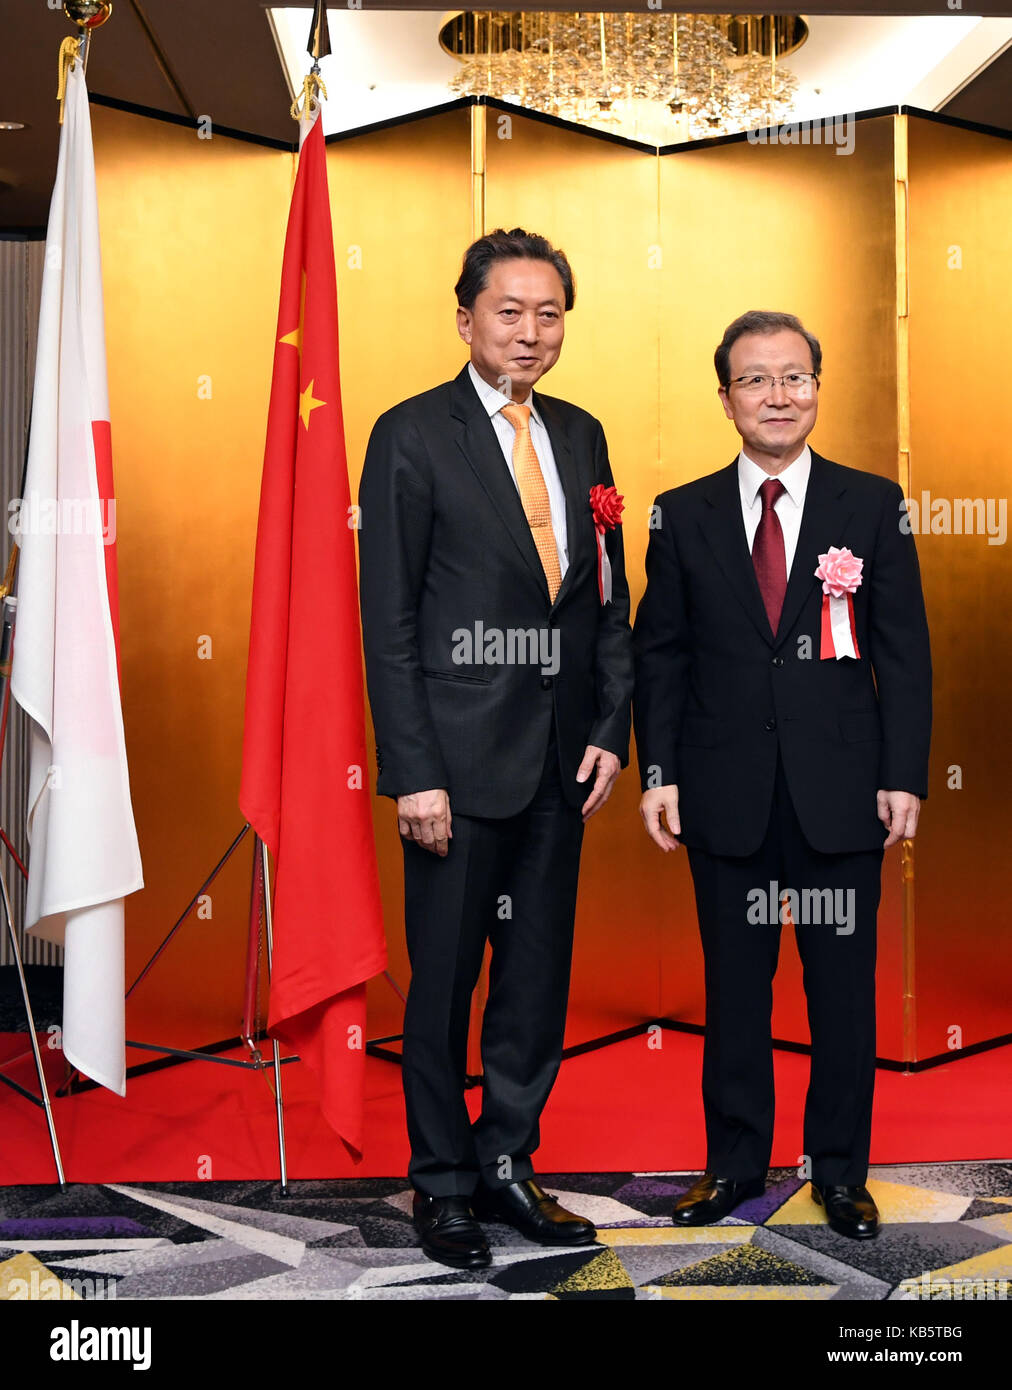 Tokyo, Japan. 28th Sep, 2017. Chinese Ambassador to Japan Cheng Yonghua (R) poses for photo with Yukio Hatoyama, former prime minister of Japan, at a ceremony marking China's upcoming National Day in Tokyo, Japan, Sept. 28, 2017. Credit: Ma Ping/Xinhua/Alamy Live News Stock Photo